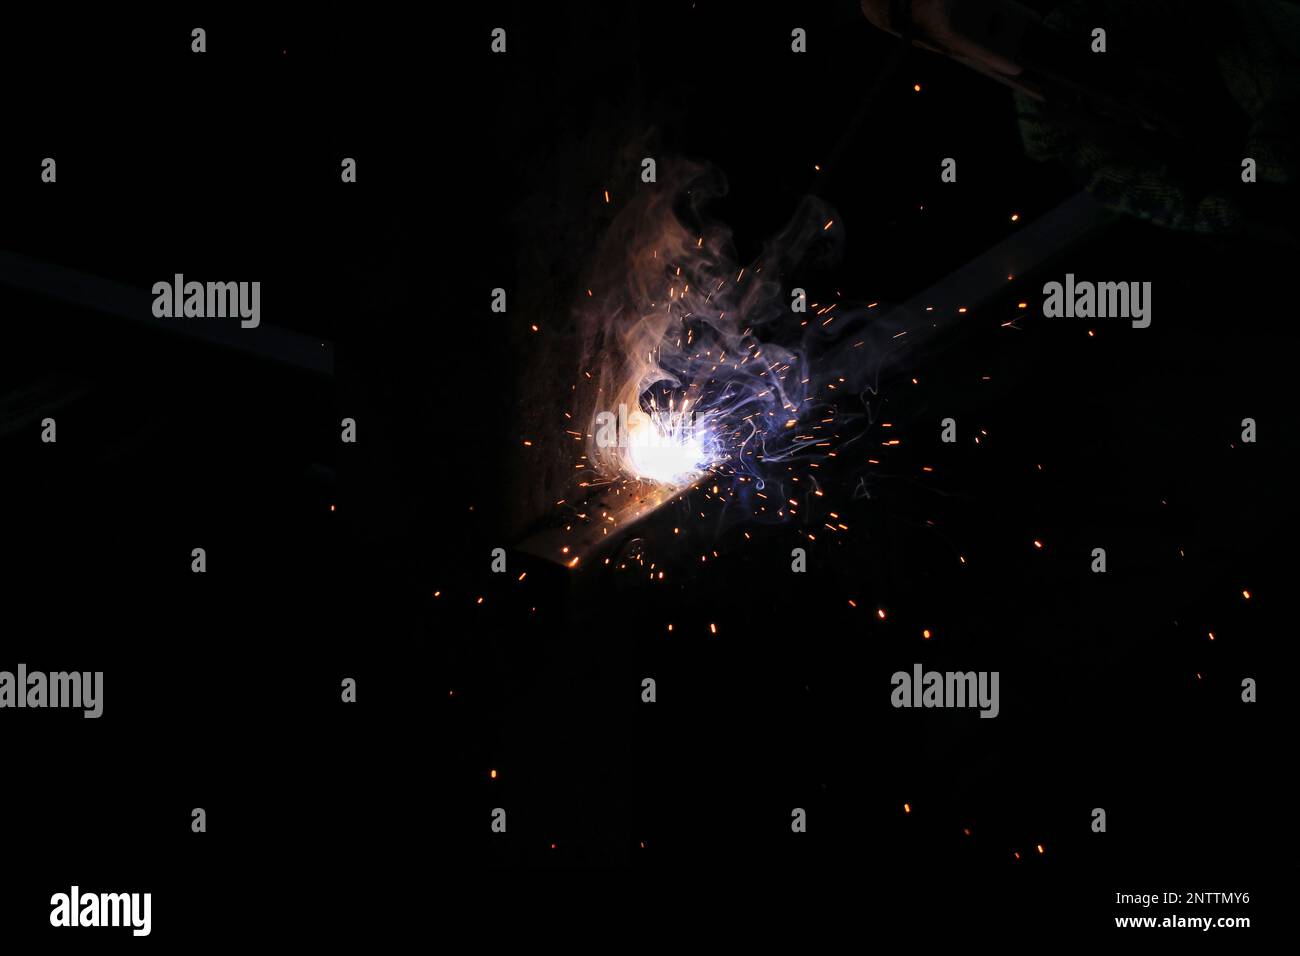 Workers welding steel making beautiful colorful sparks in abstract shapes. Stock Photo